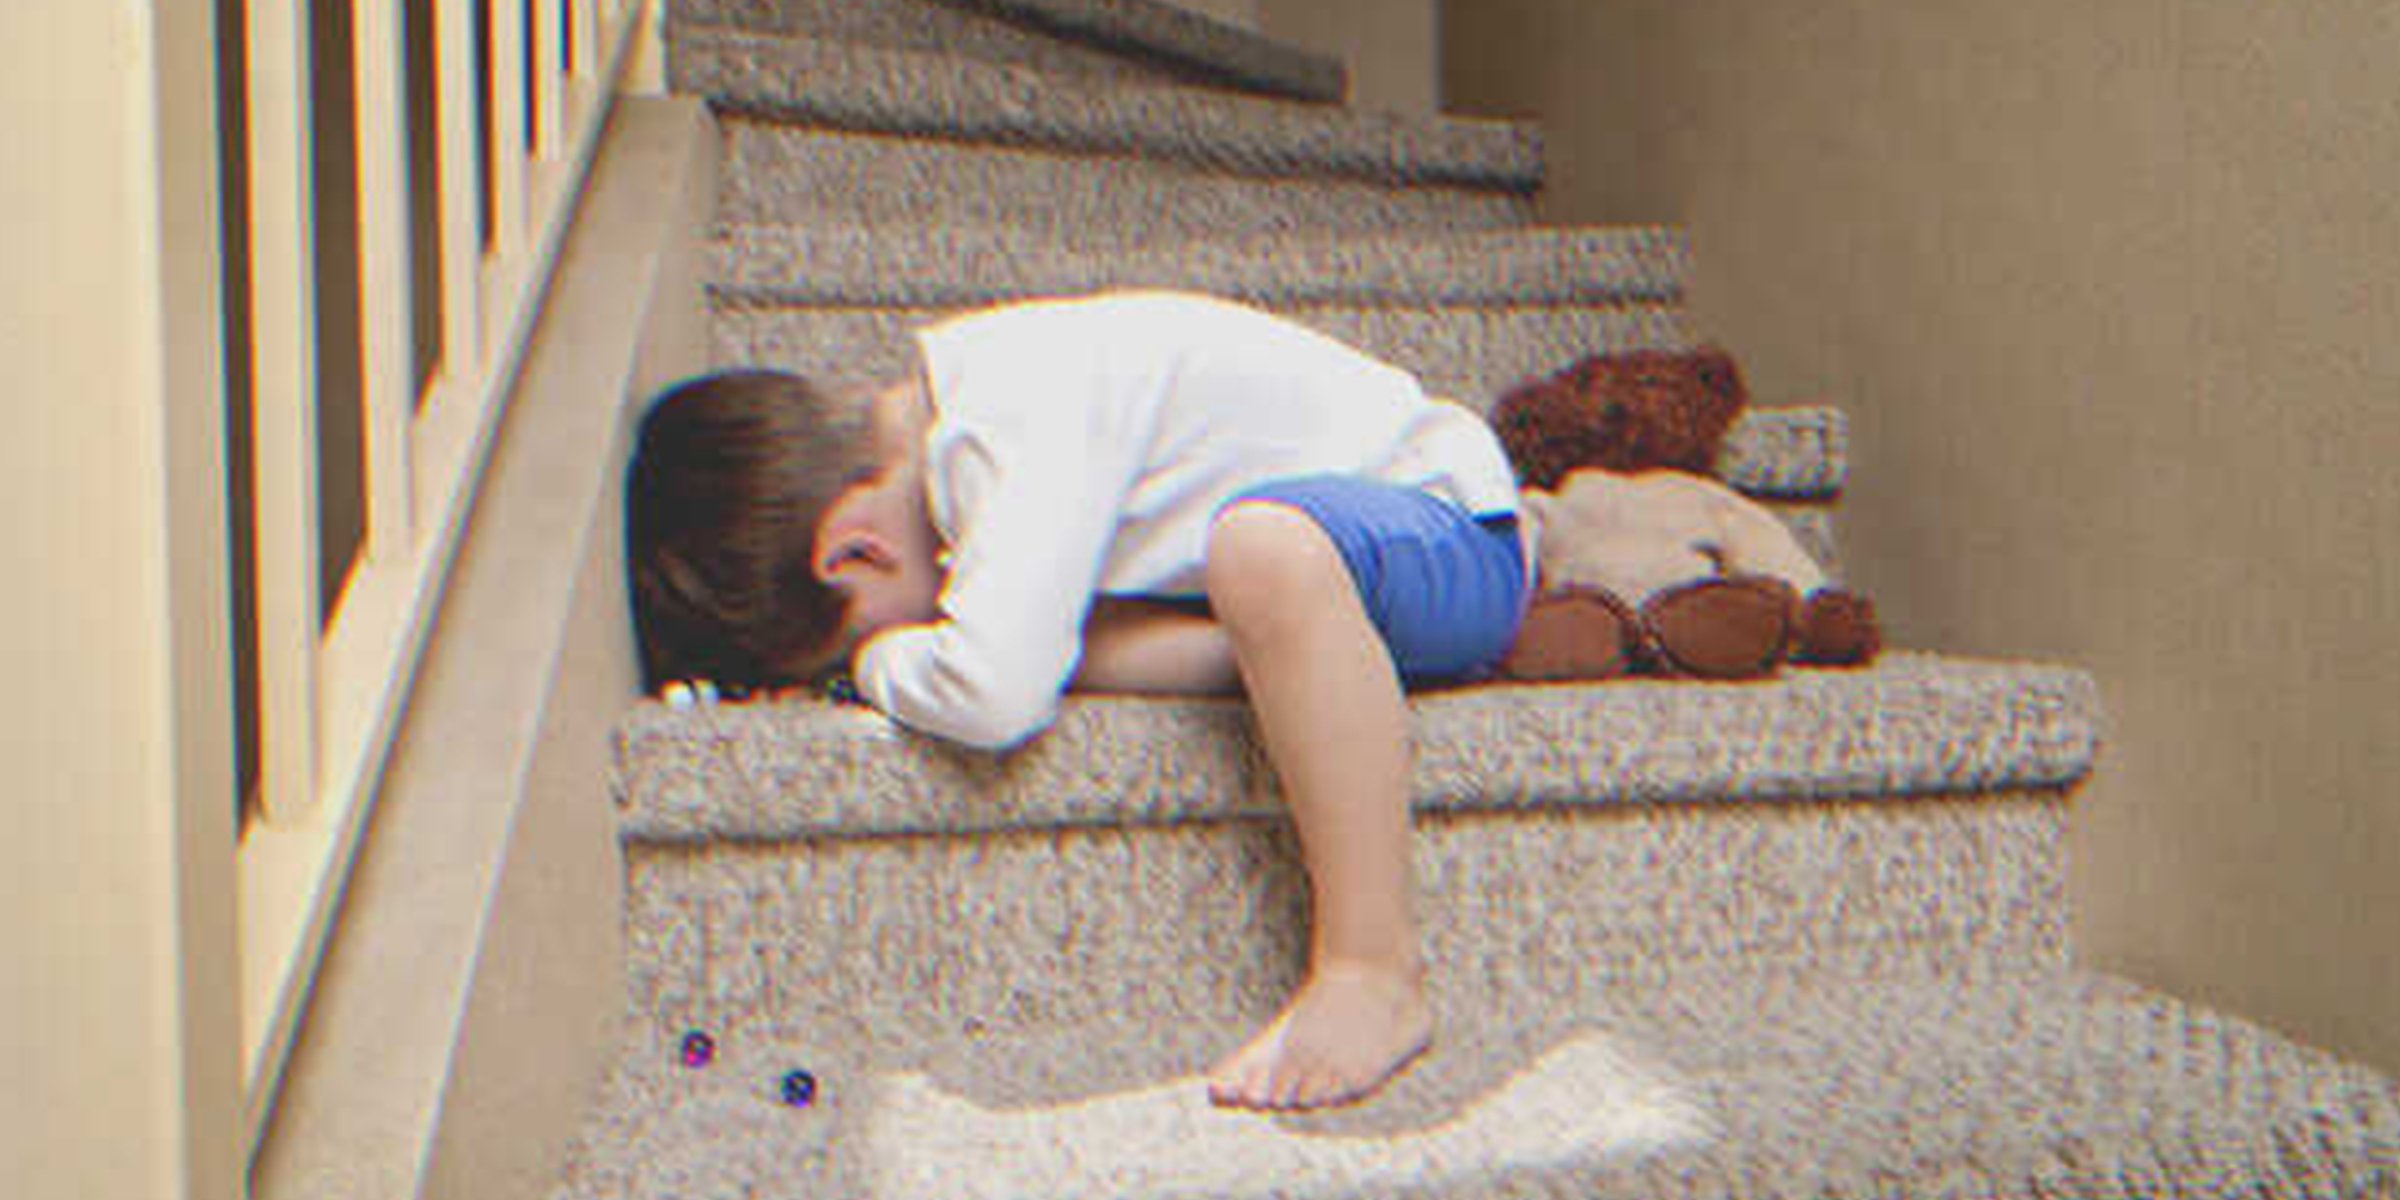 A boy crying on the stairs of a house | Source: Shutterstock